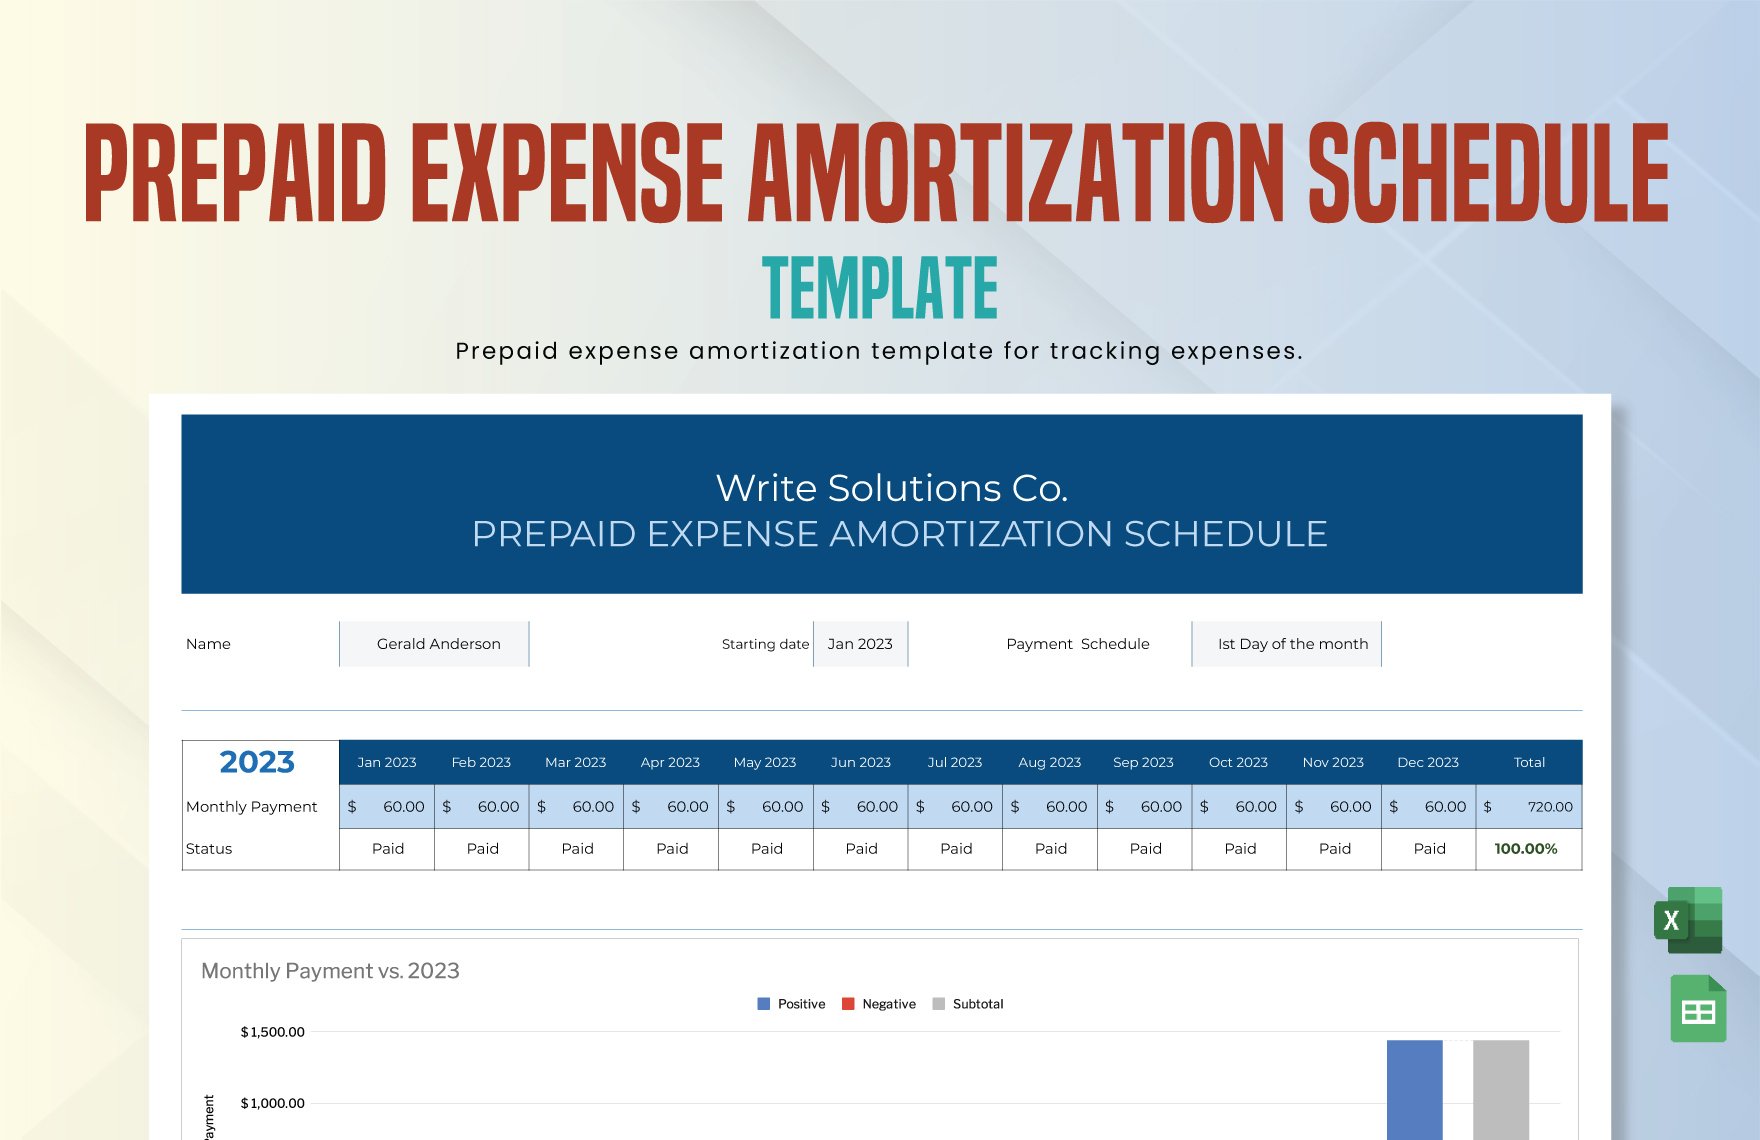 Prepaid Expense Amortization Schedule in Excel, Google Sheets